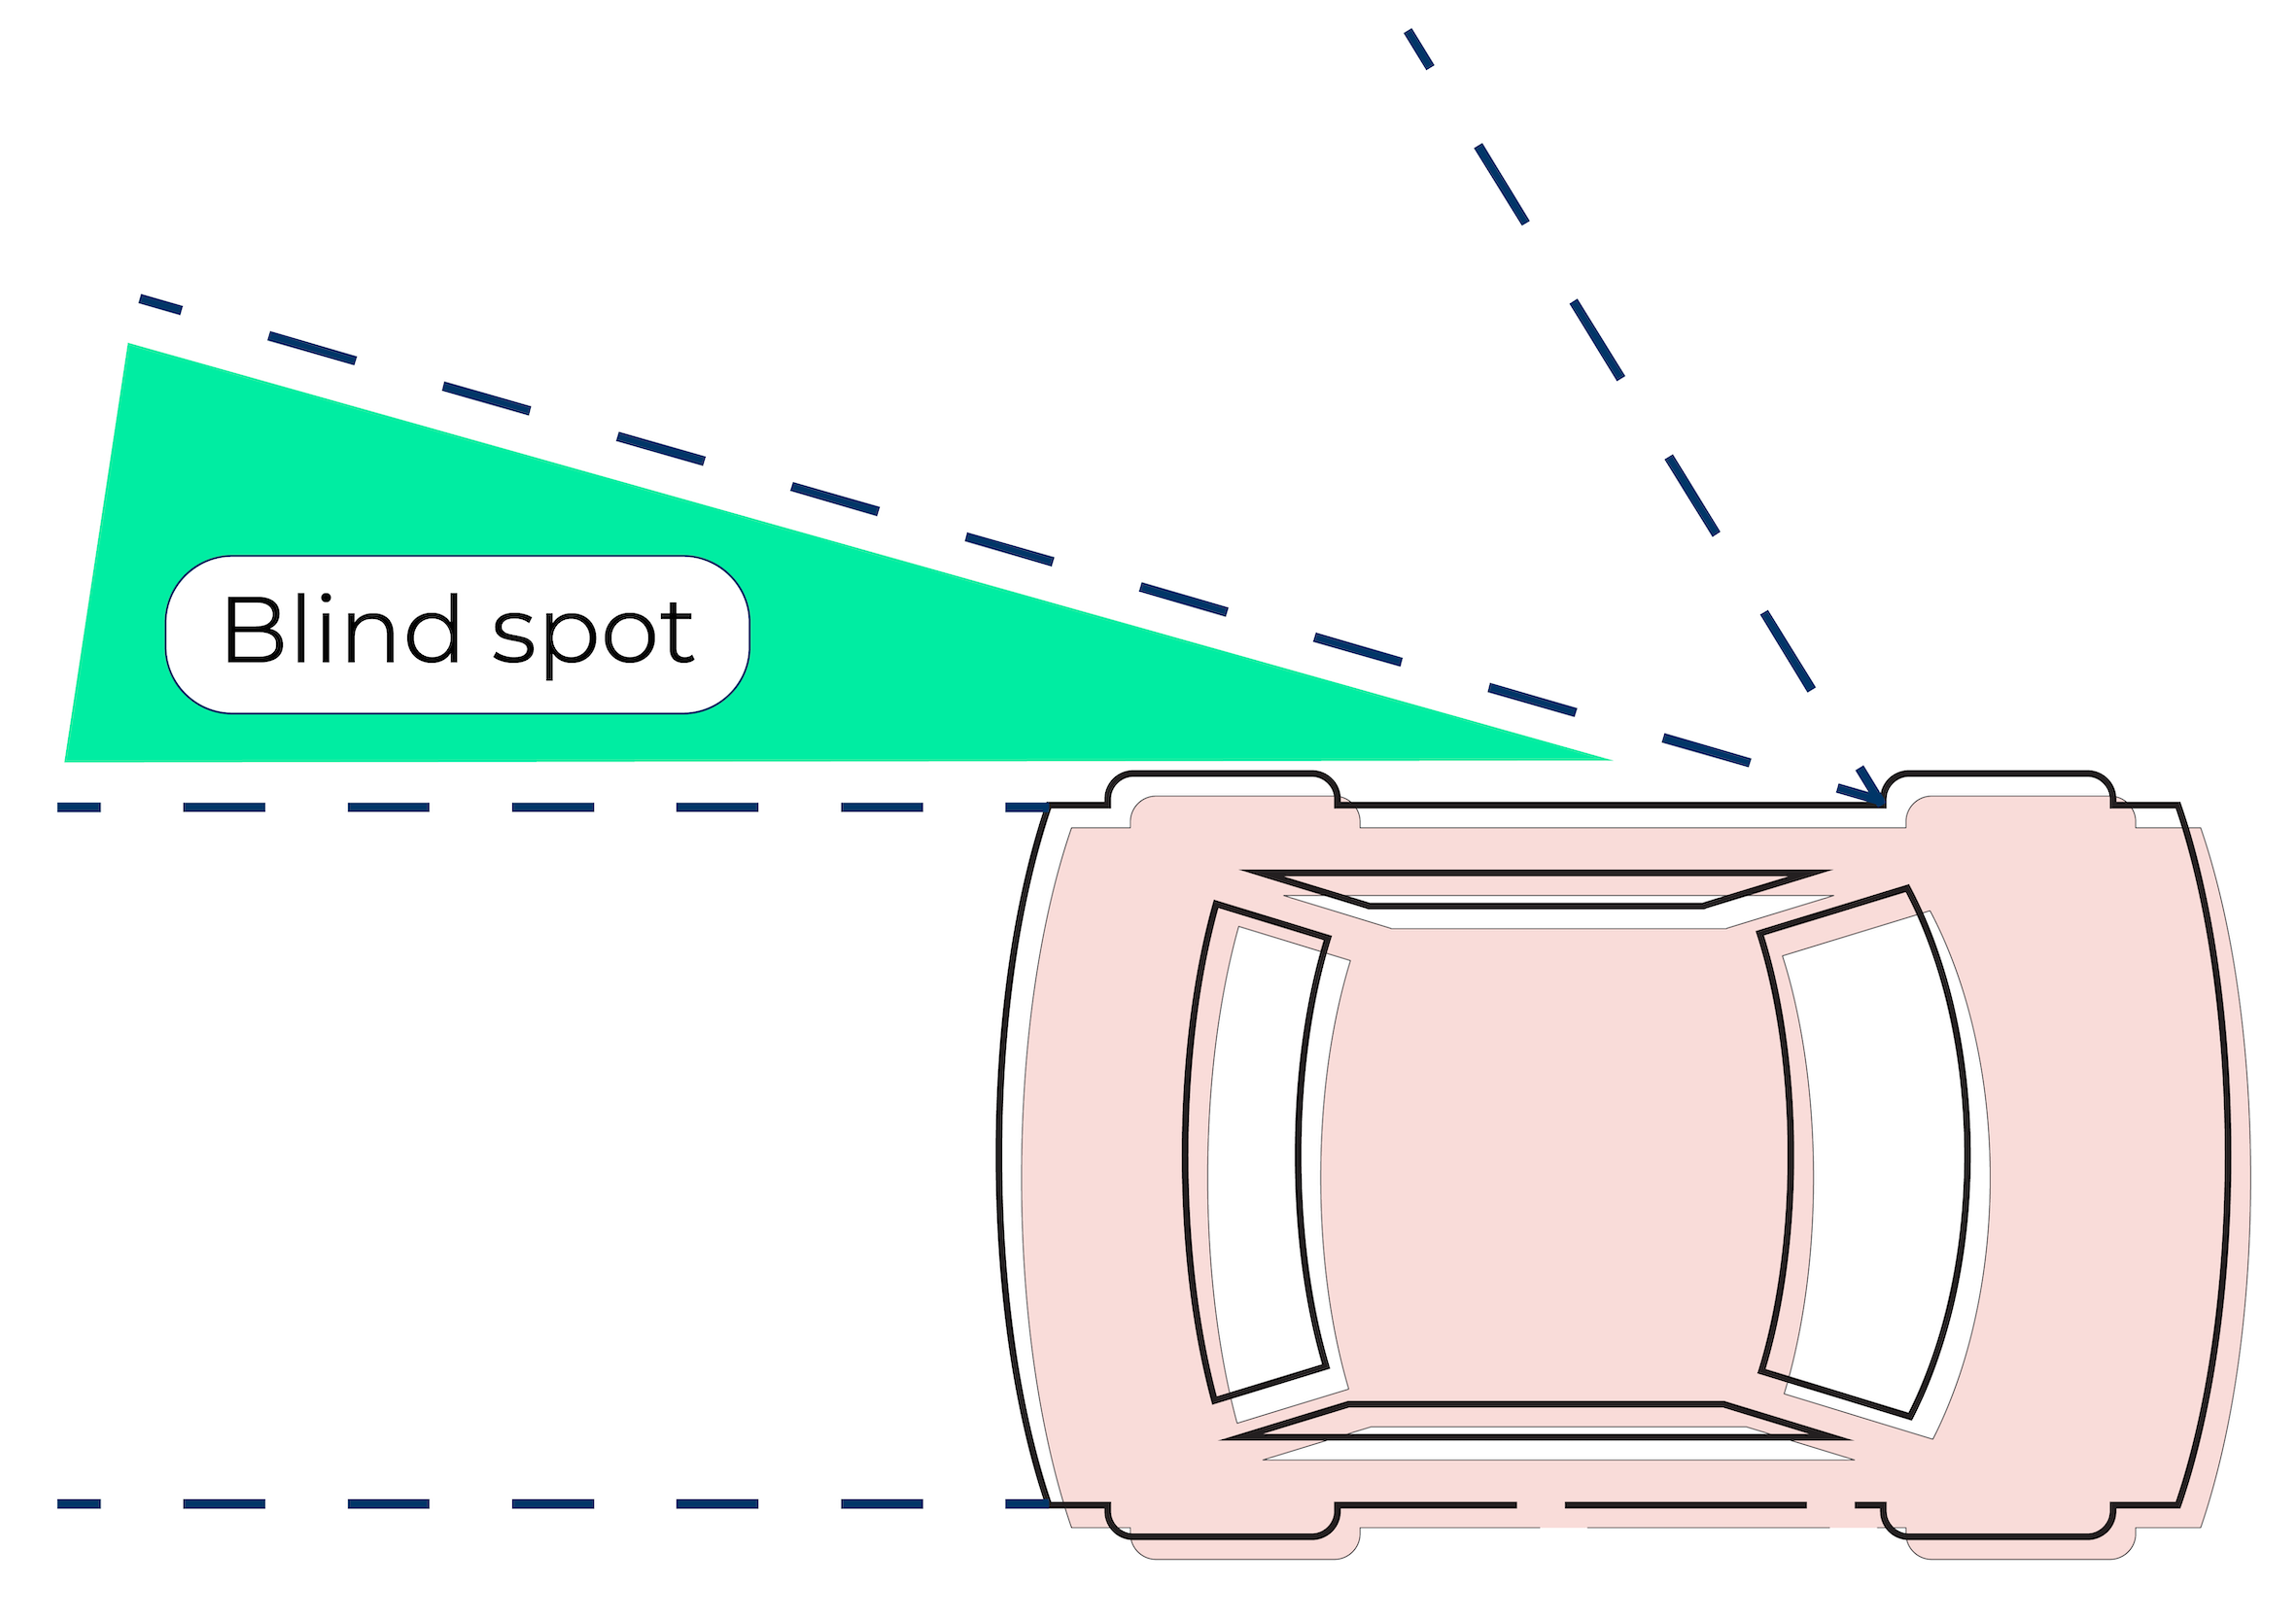 A diagram of a car and the blindspot between what is visible in the rear-view mirror and what is visible over the driver's shoulder.